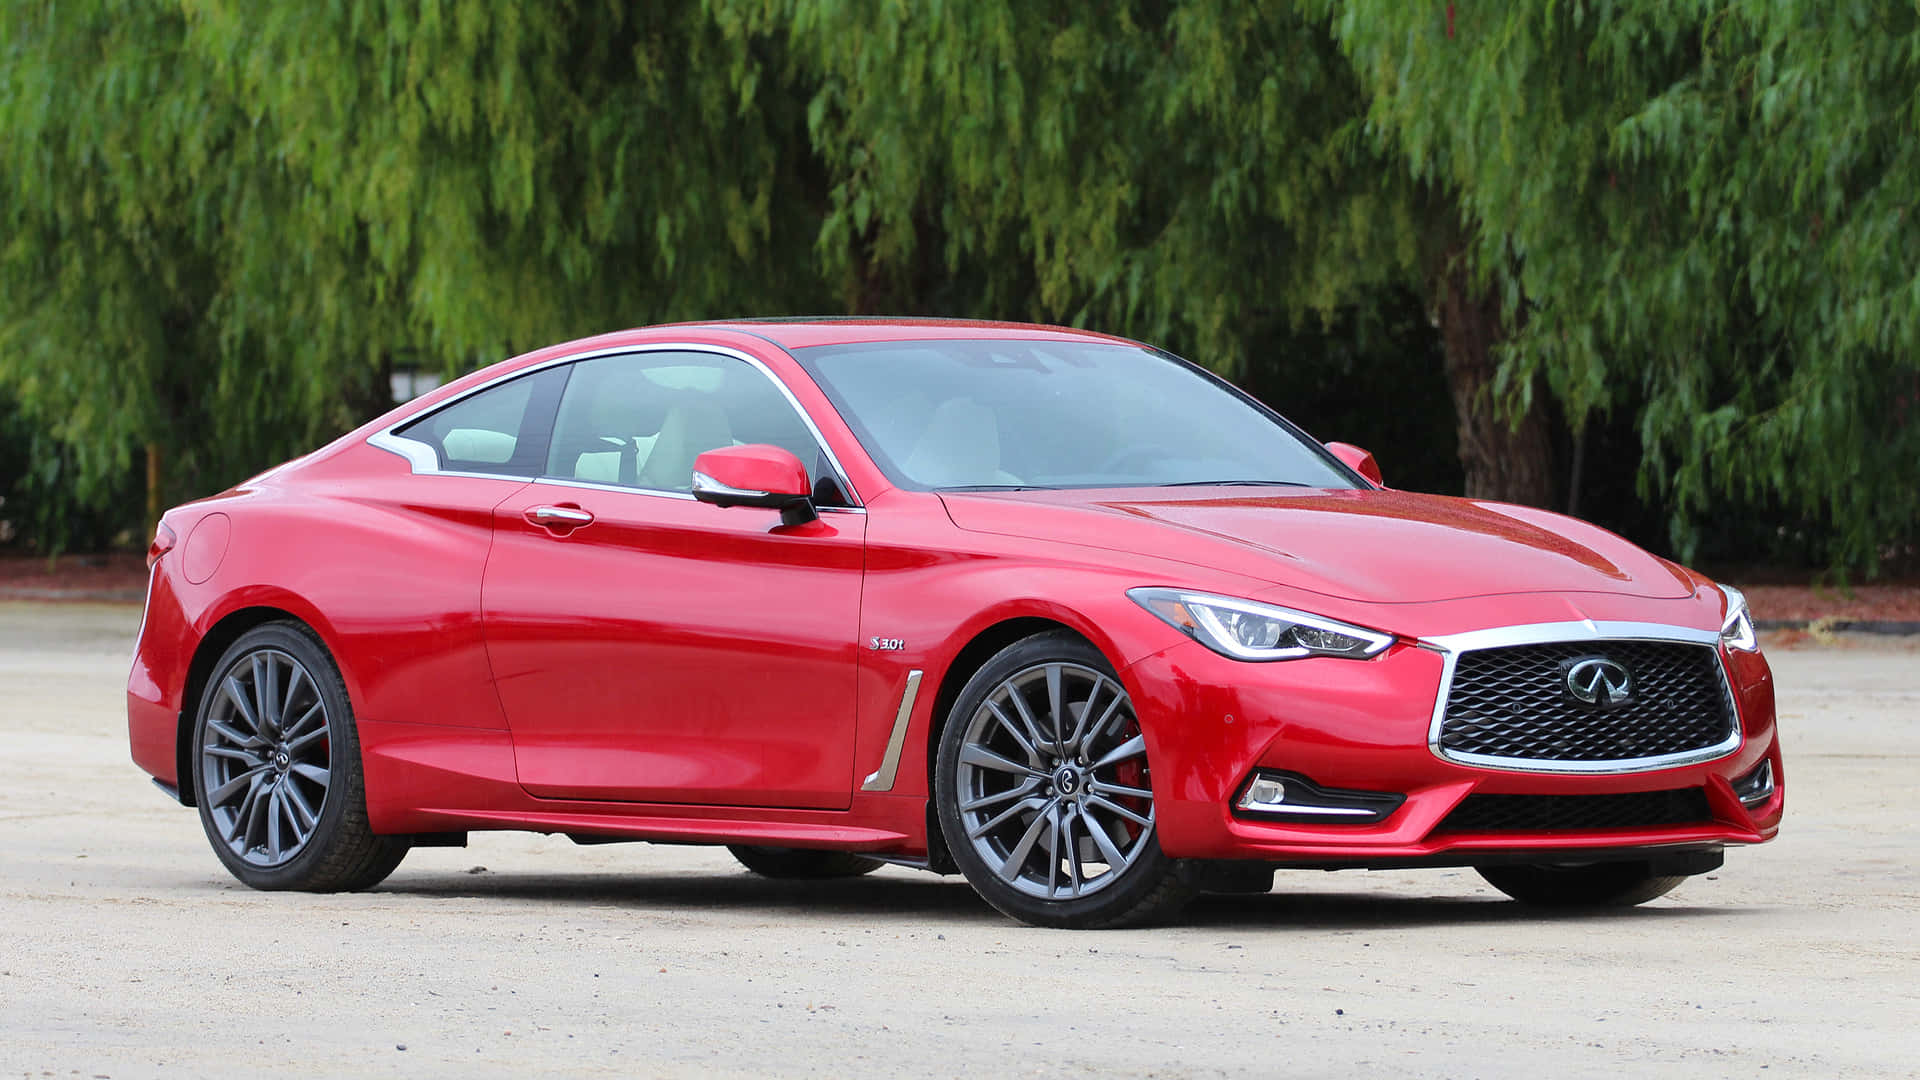 Sleek Infiniti Q60 Sports Coupe in action Wallpaper